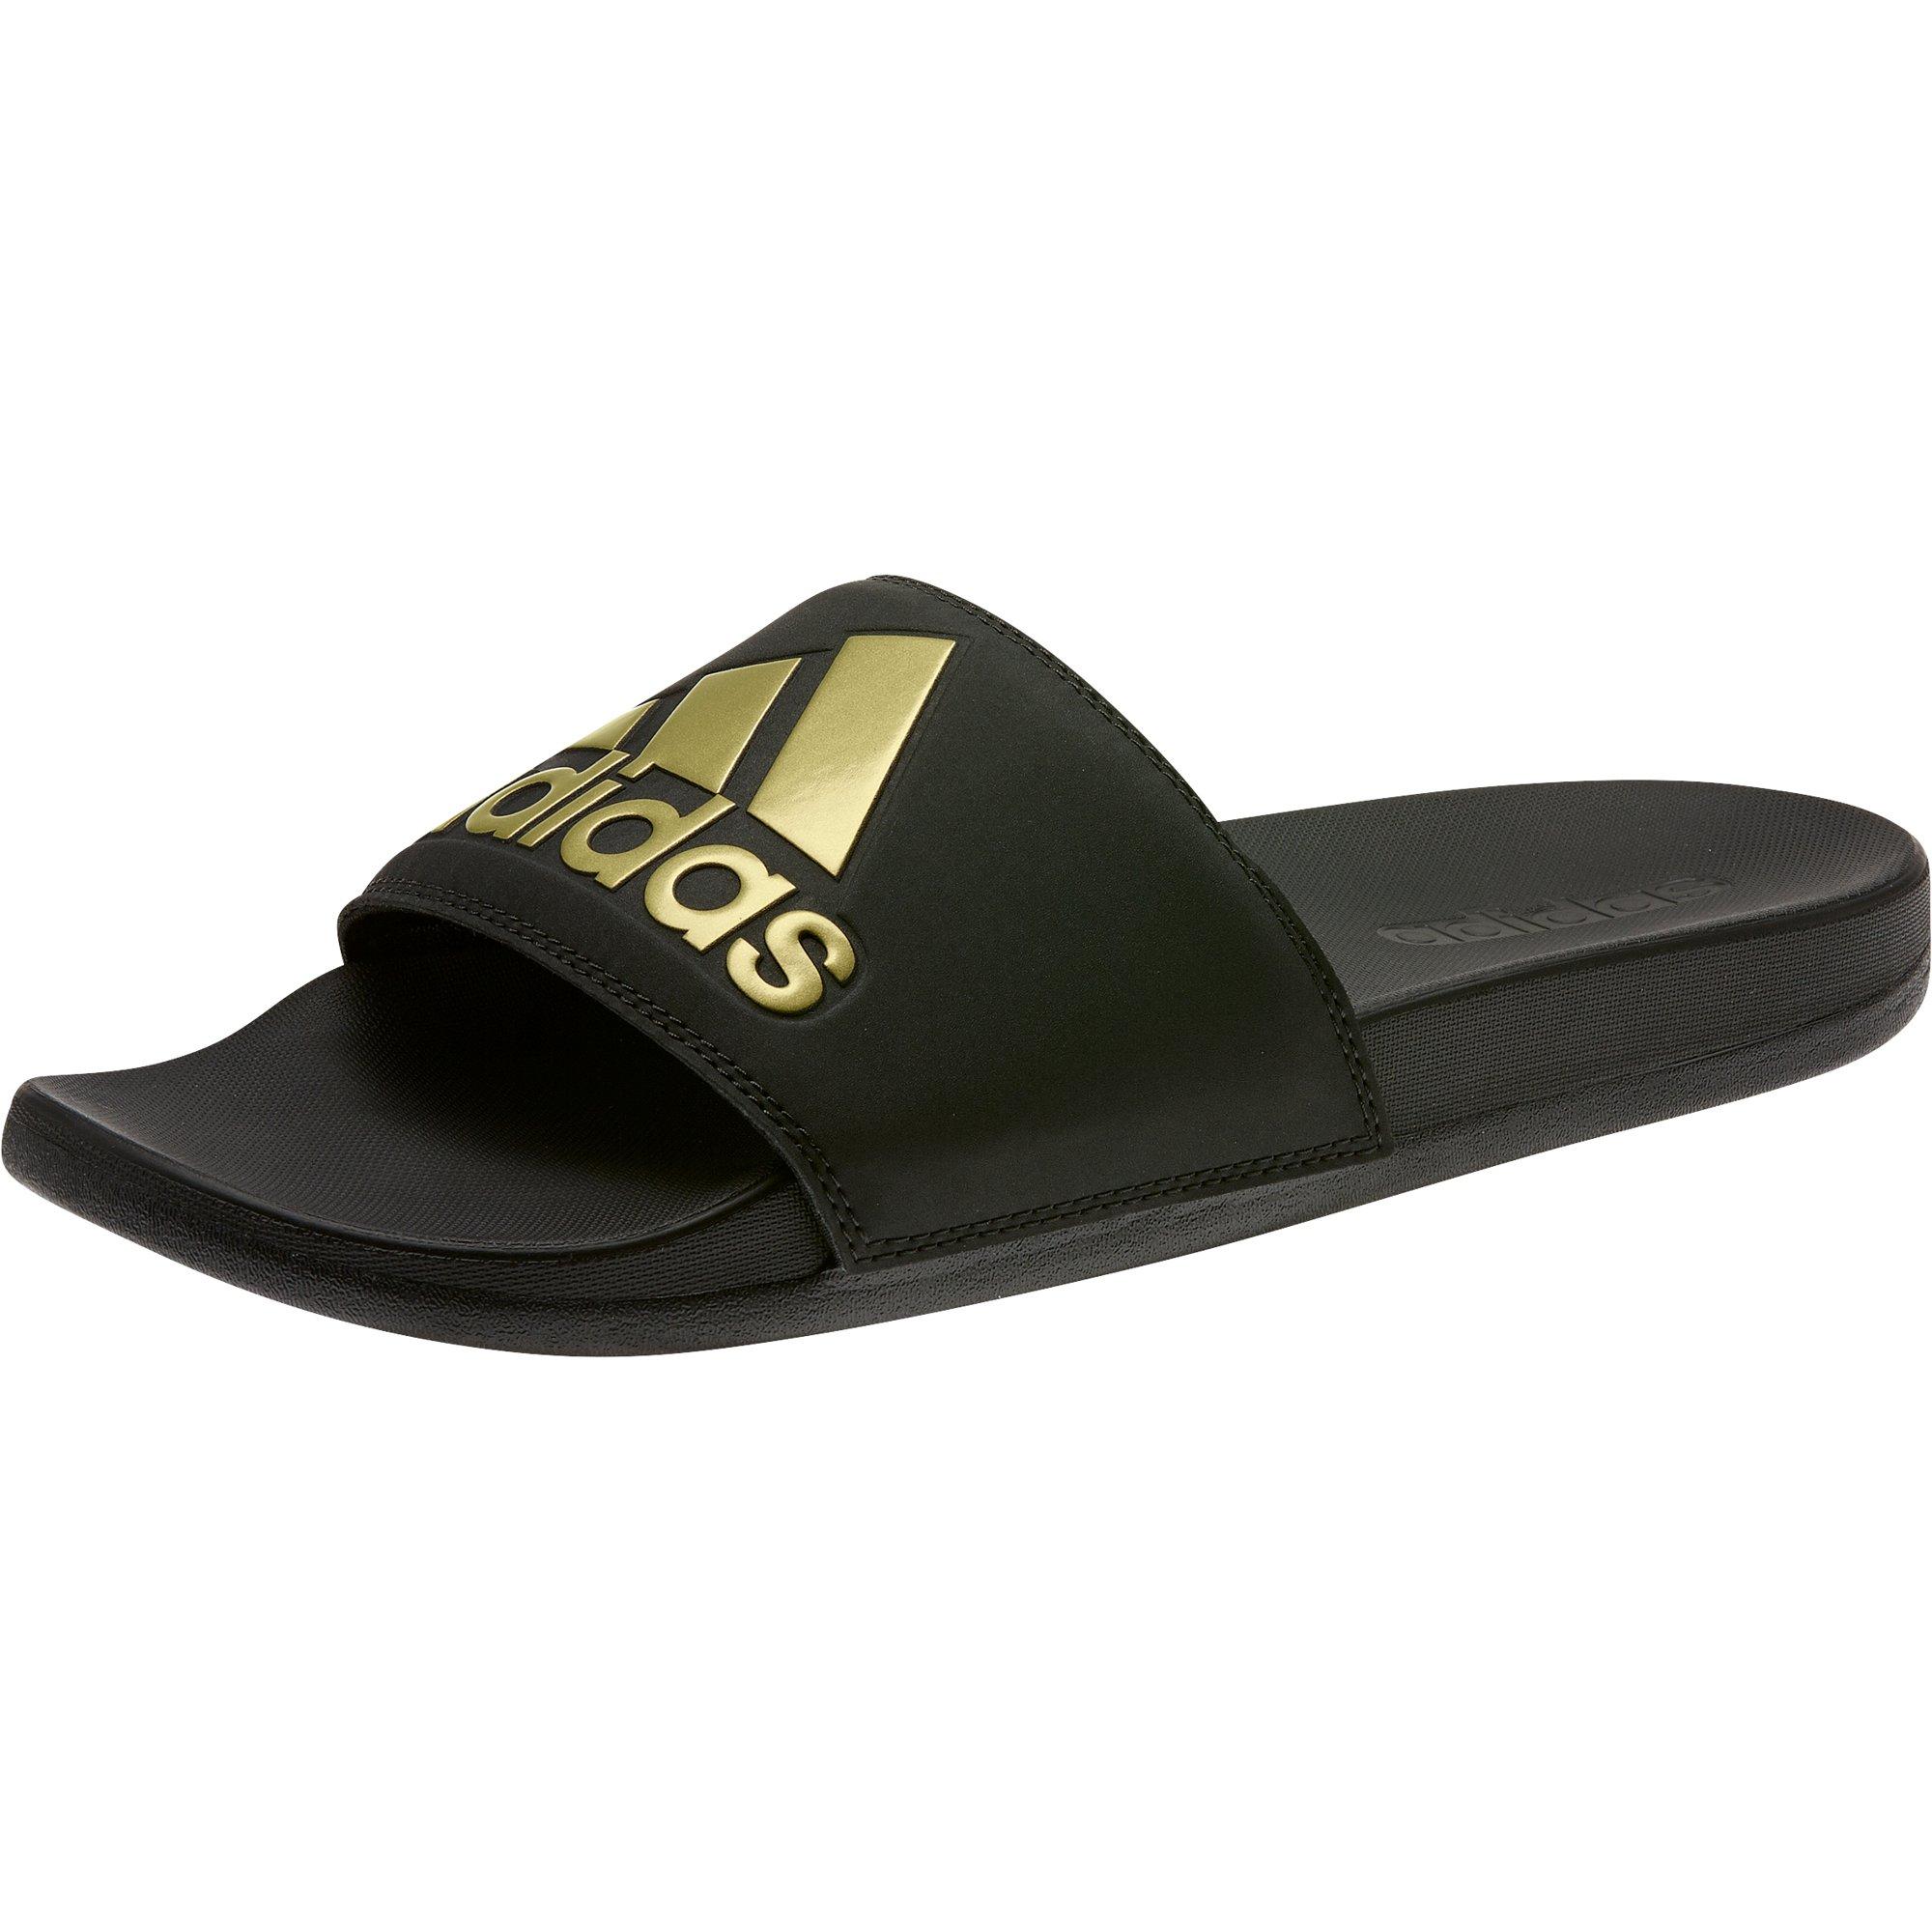 adidas slippers black and gold